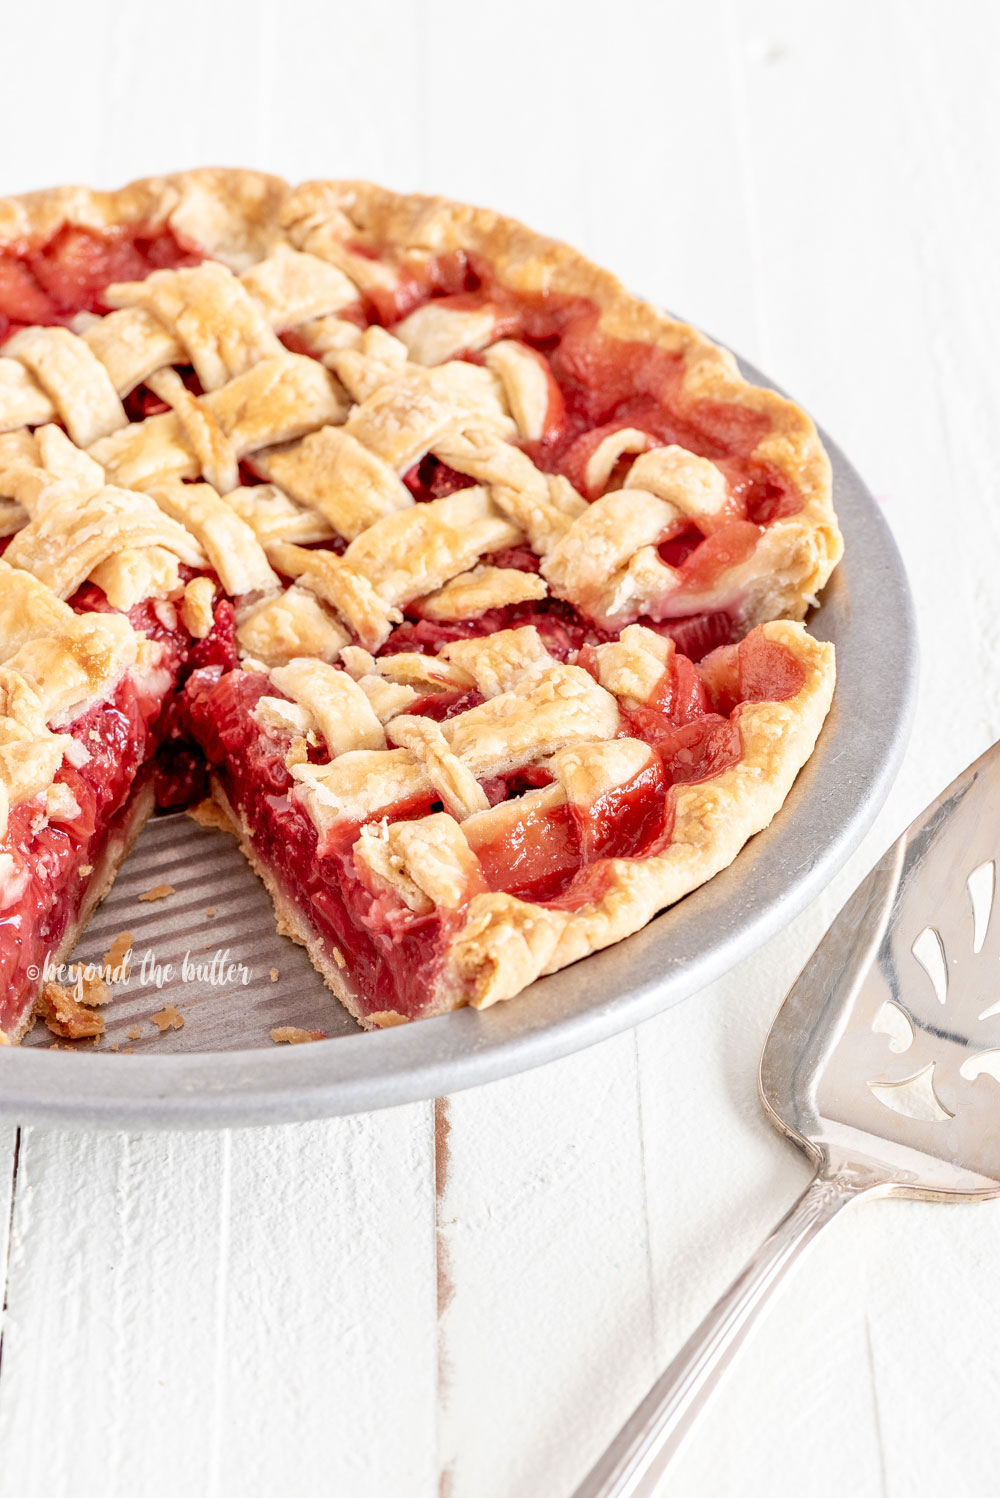 Strawberry Rhubarb Pie Recipe | All Images © Beyond the Butter, LLC